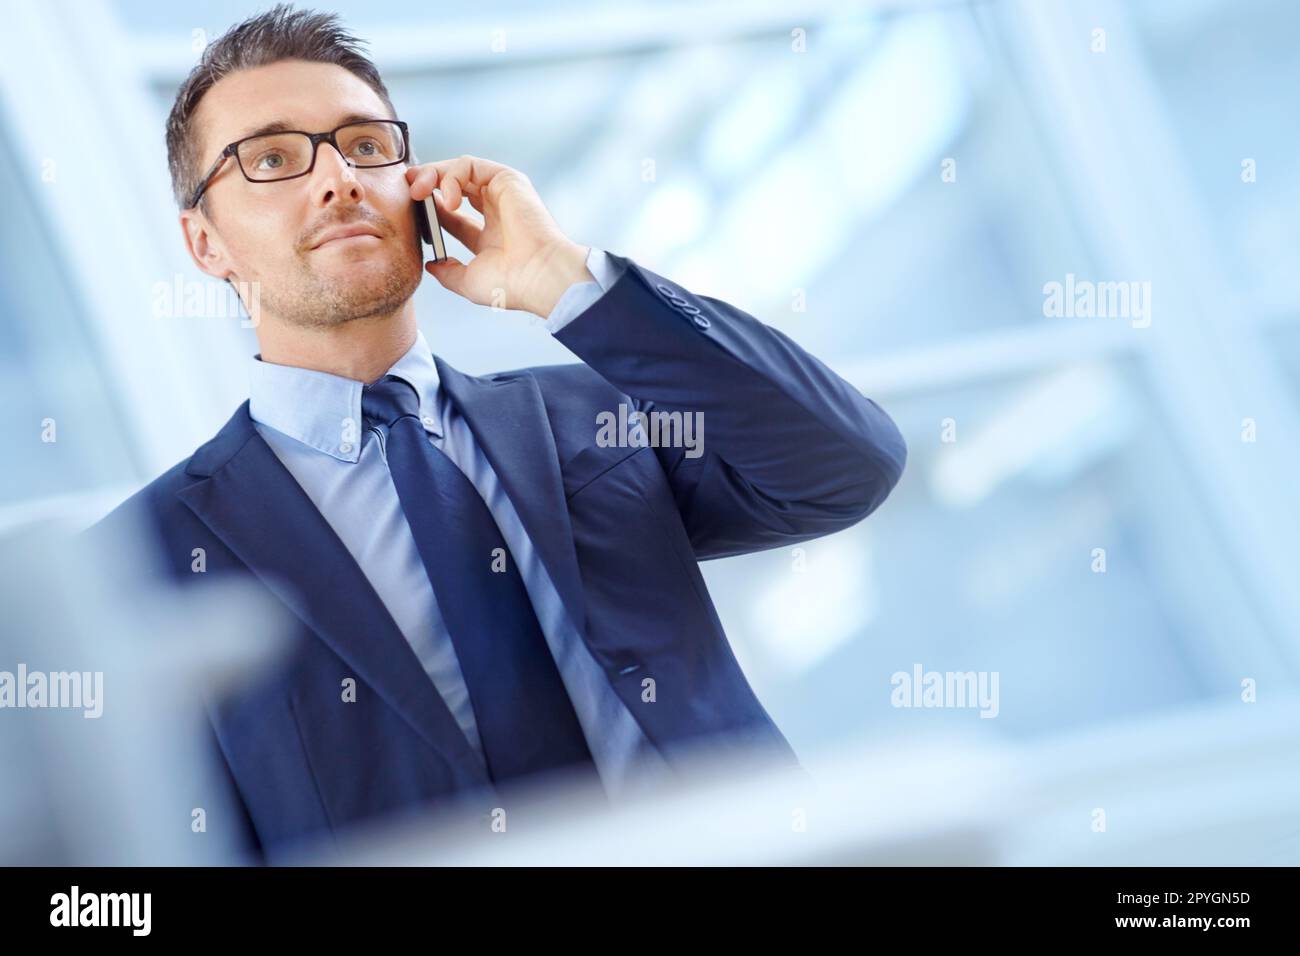 Taking a corporate call. Handsome mature businessman on his mobile while looking away. Stock Photo